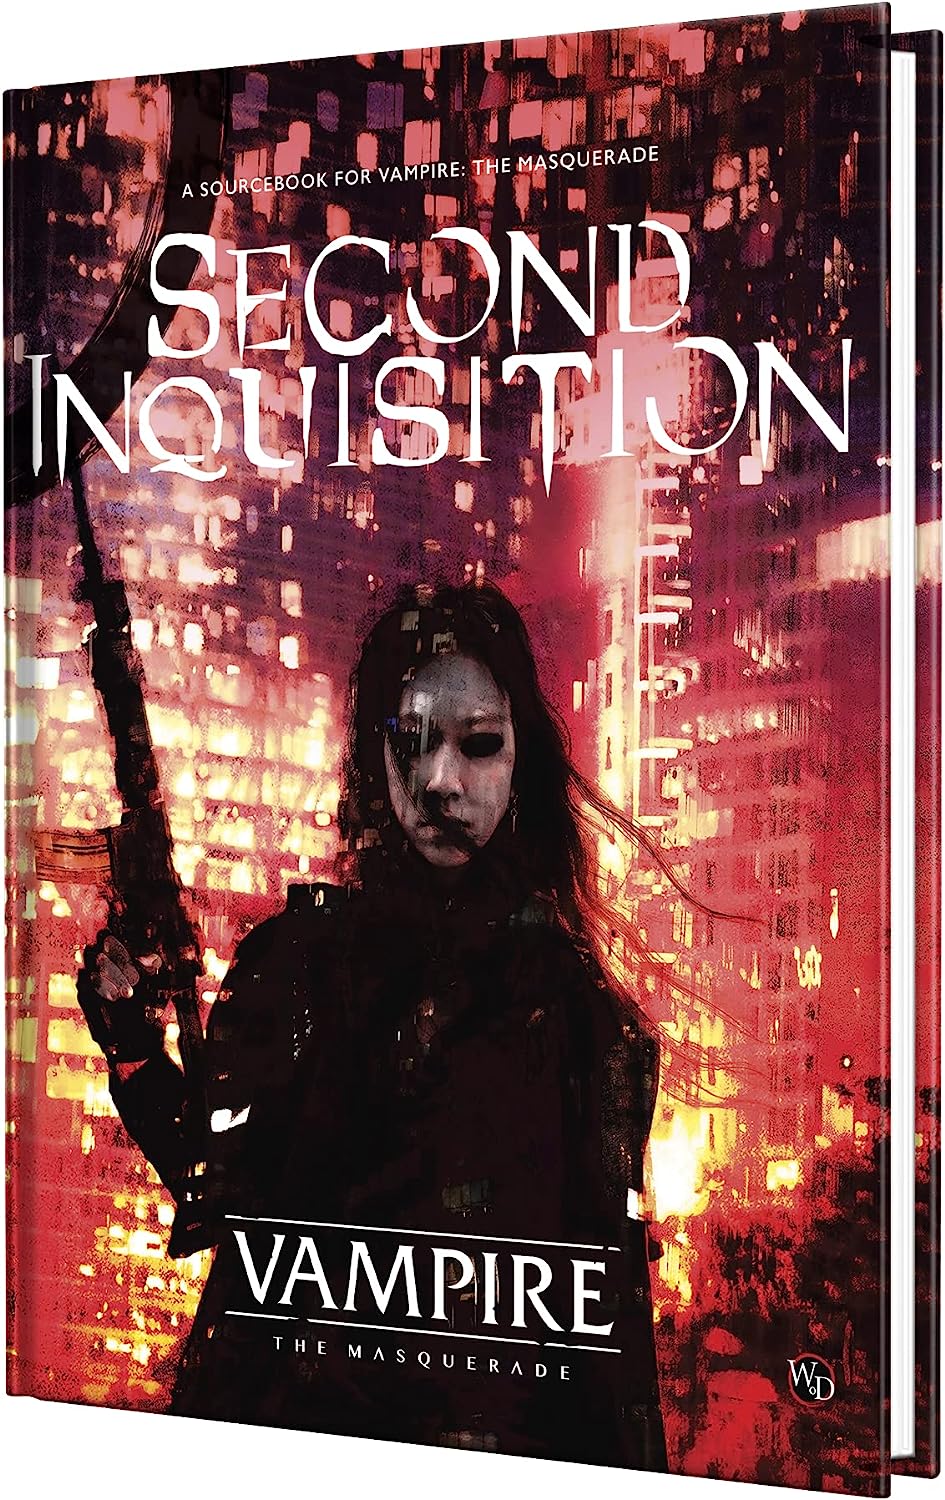 Vampire: The Masquerade 5th Edition Roleplaying Game Second Inquisition | CCGPrime